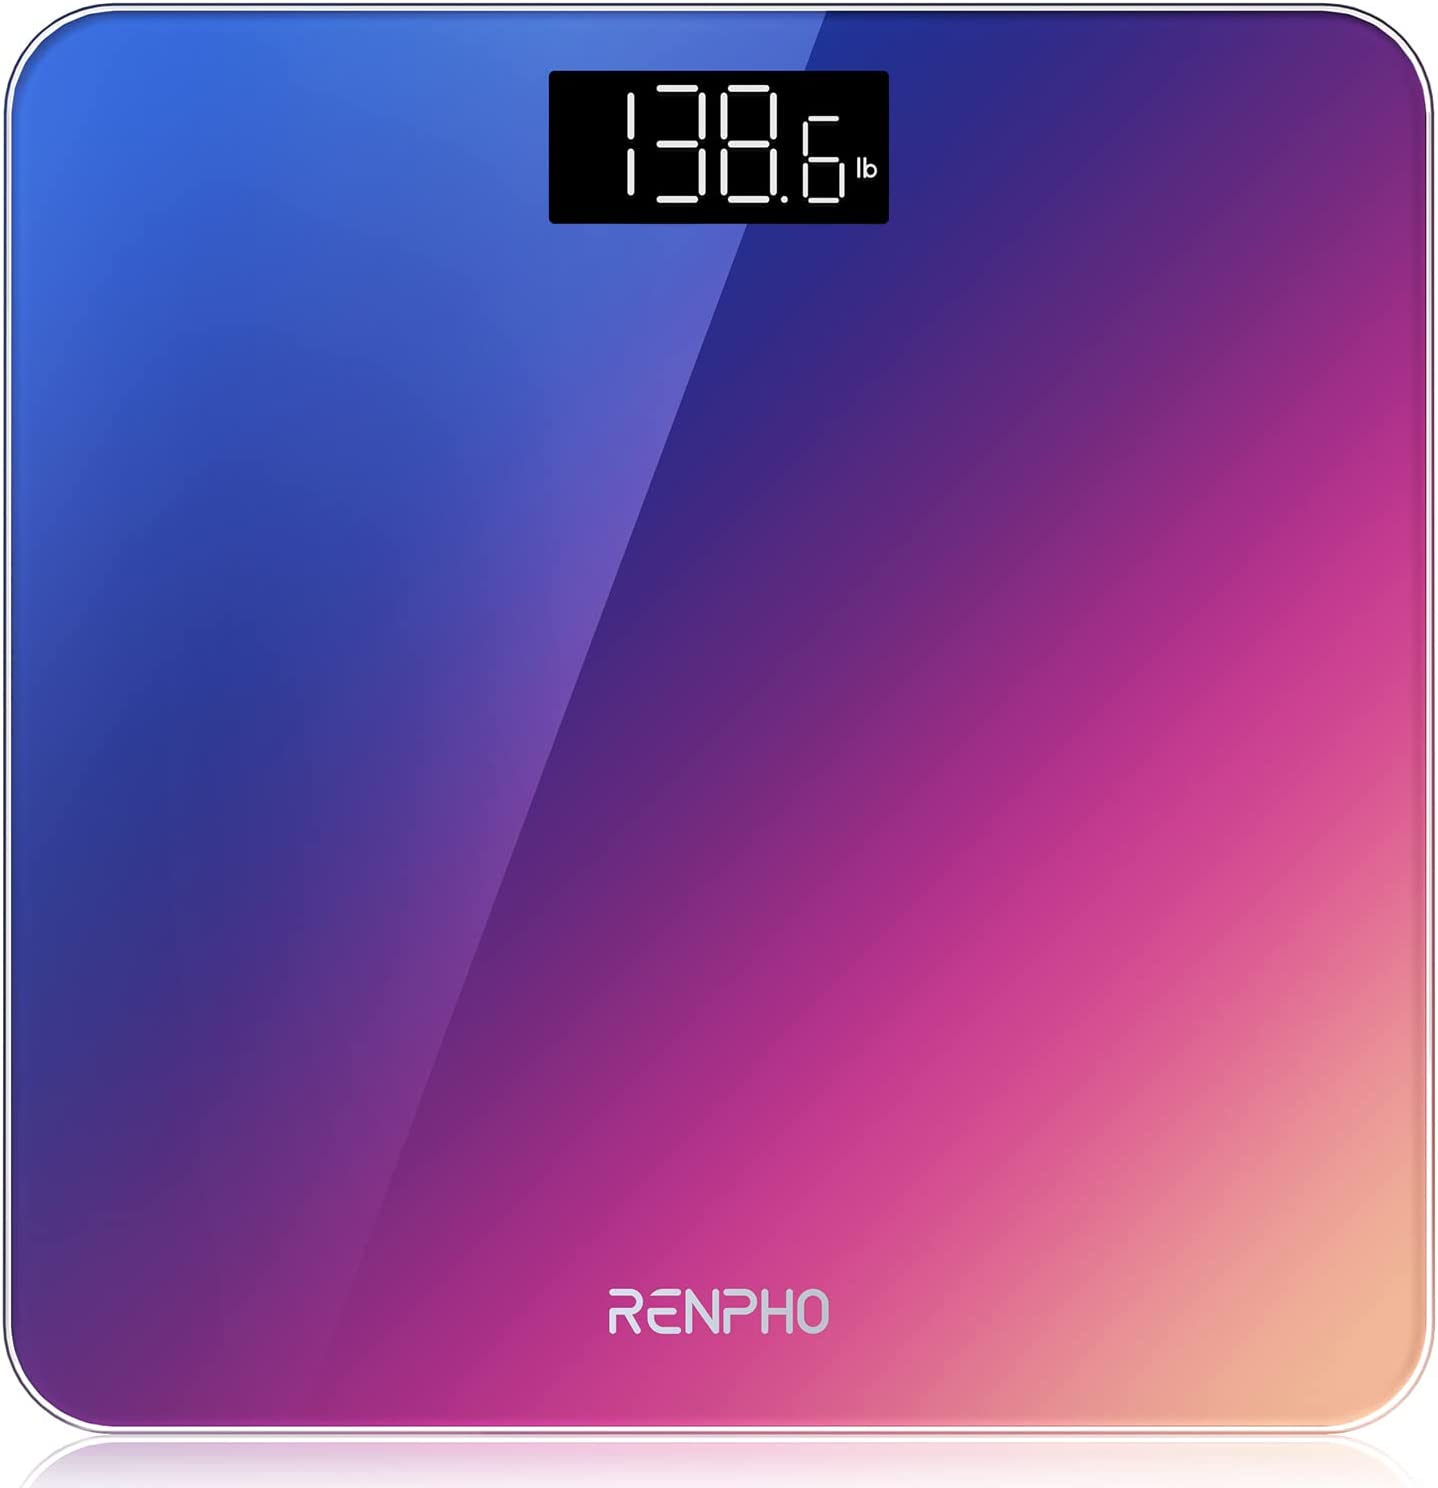 RENPHO Highly Accurate Digital Body Weight Scale, 400 lb, Gradient - image 1 of 7